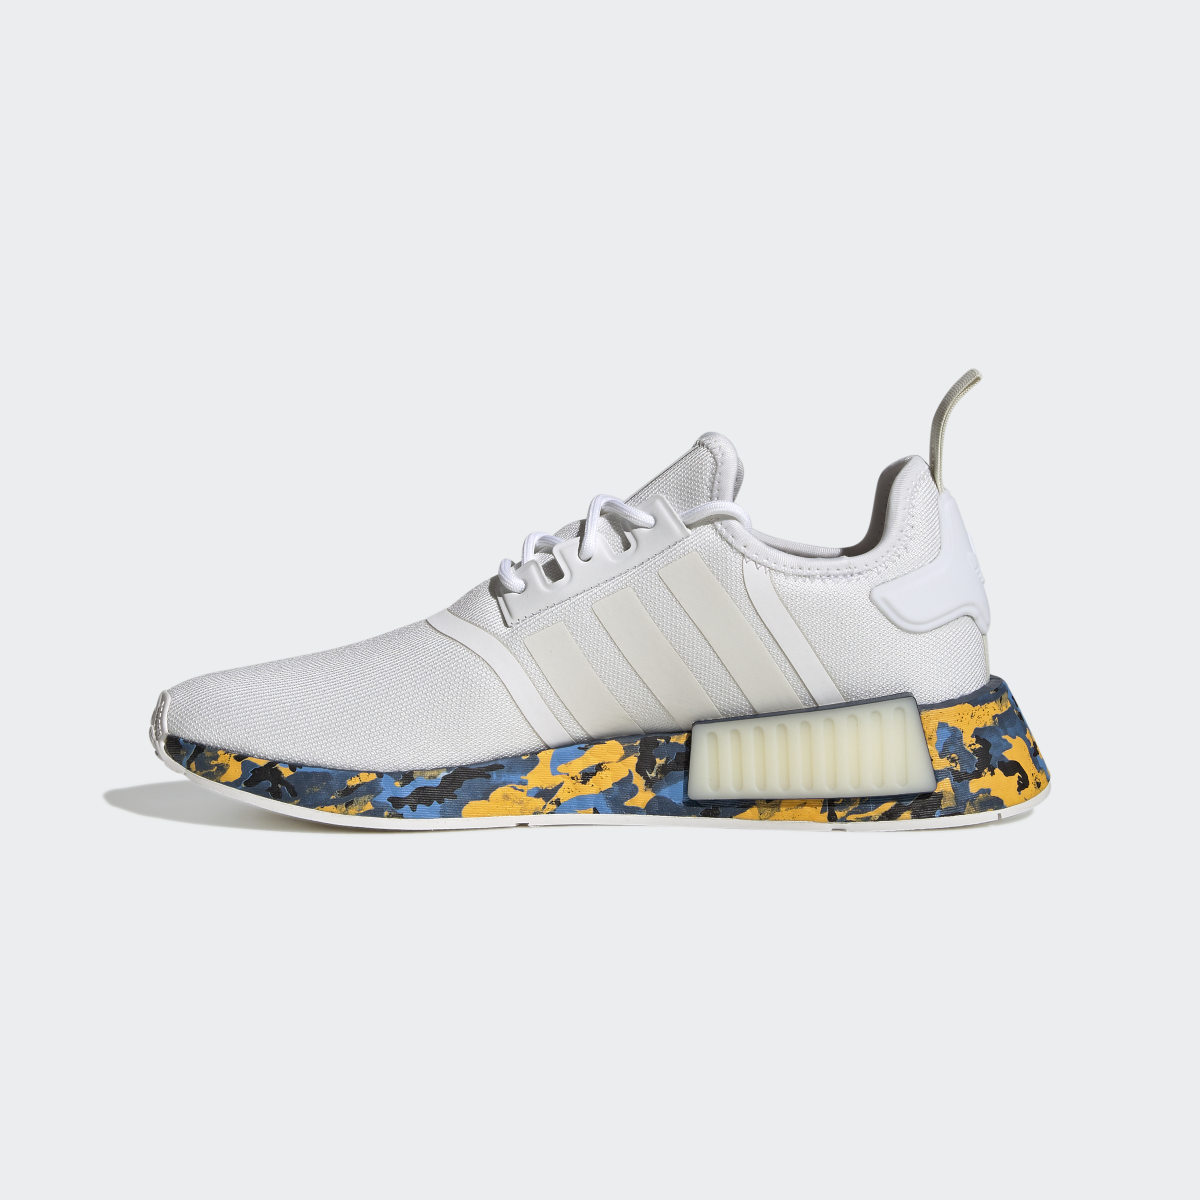 Adidas NMD Shoes. 7